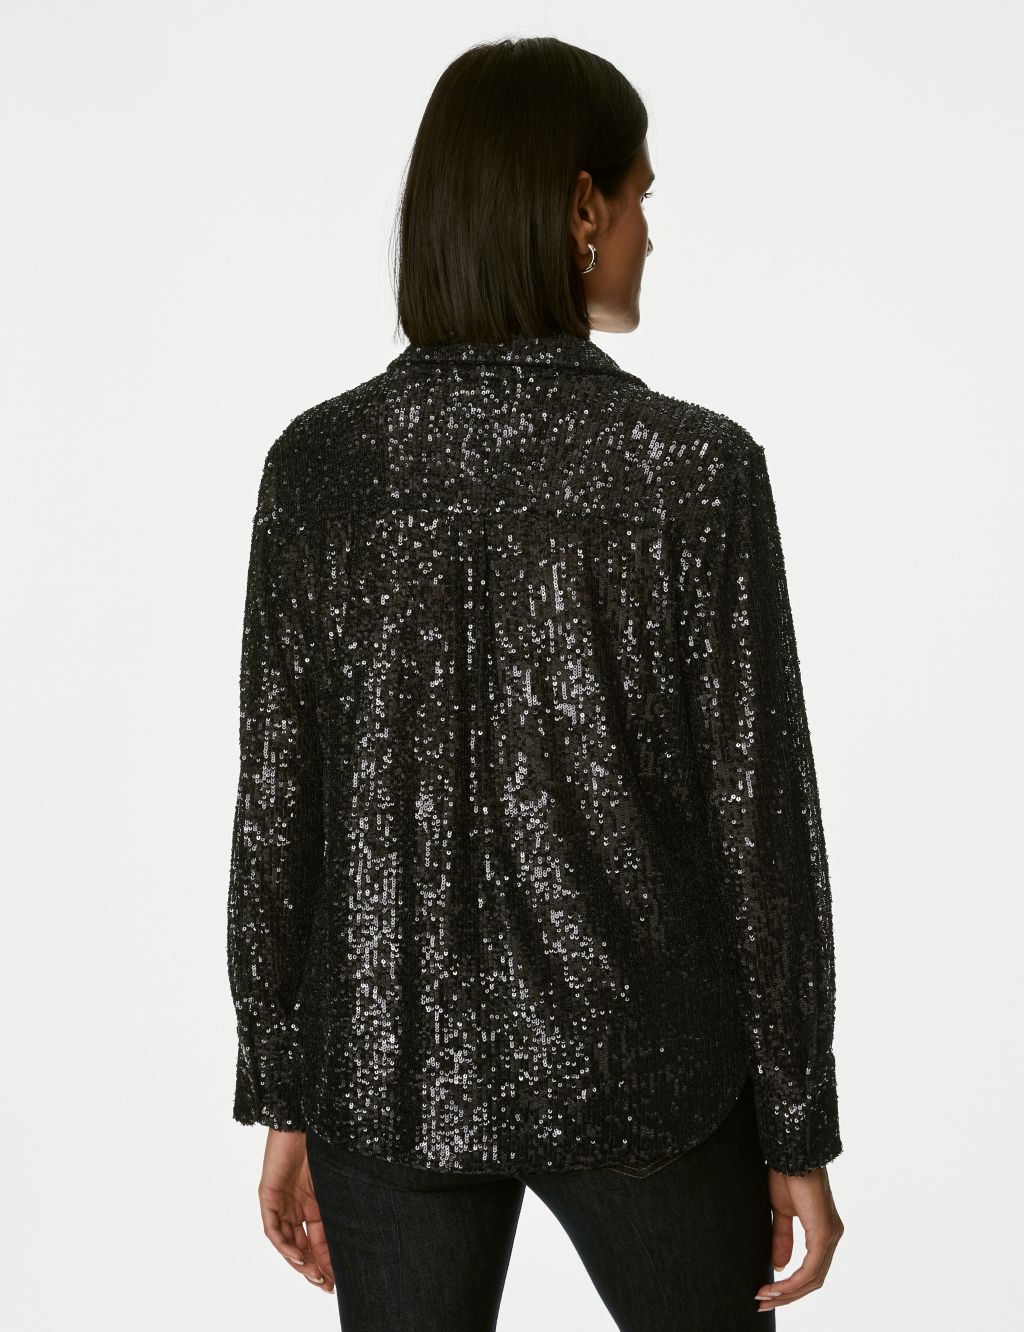 Sequin Collared Shirt image 5